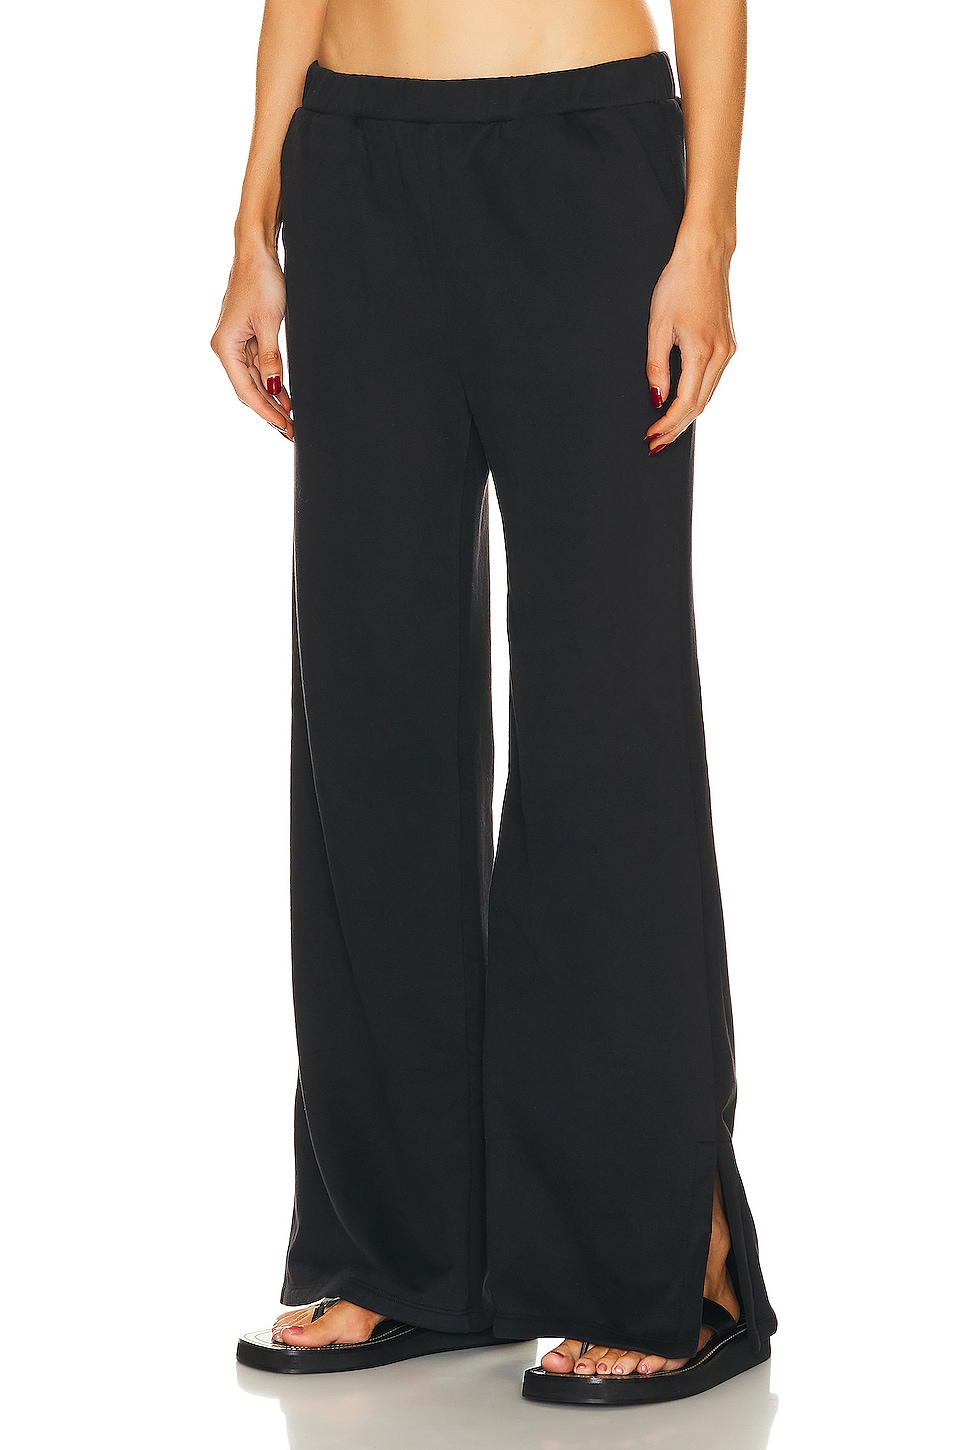 Image 1 of Beyond Yoga On The Go Pant in Black